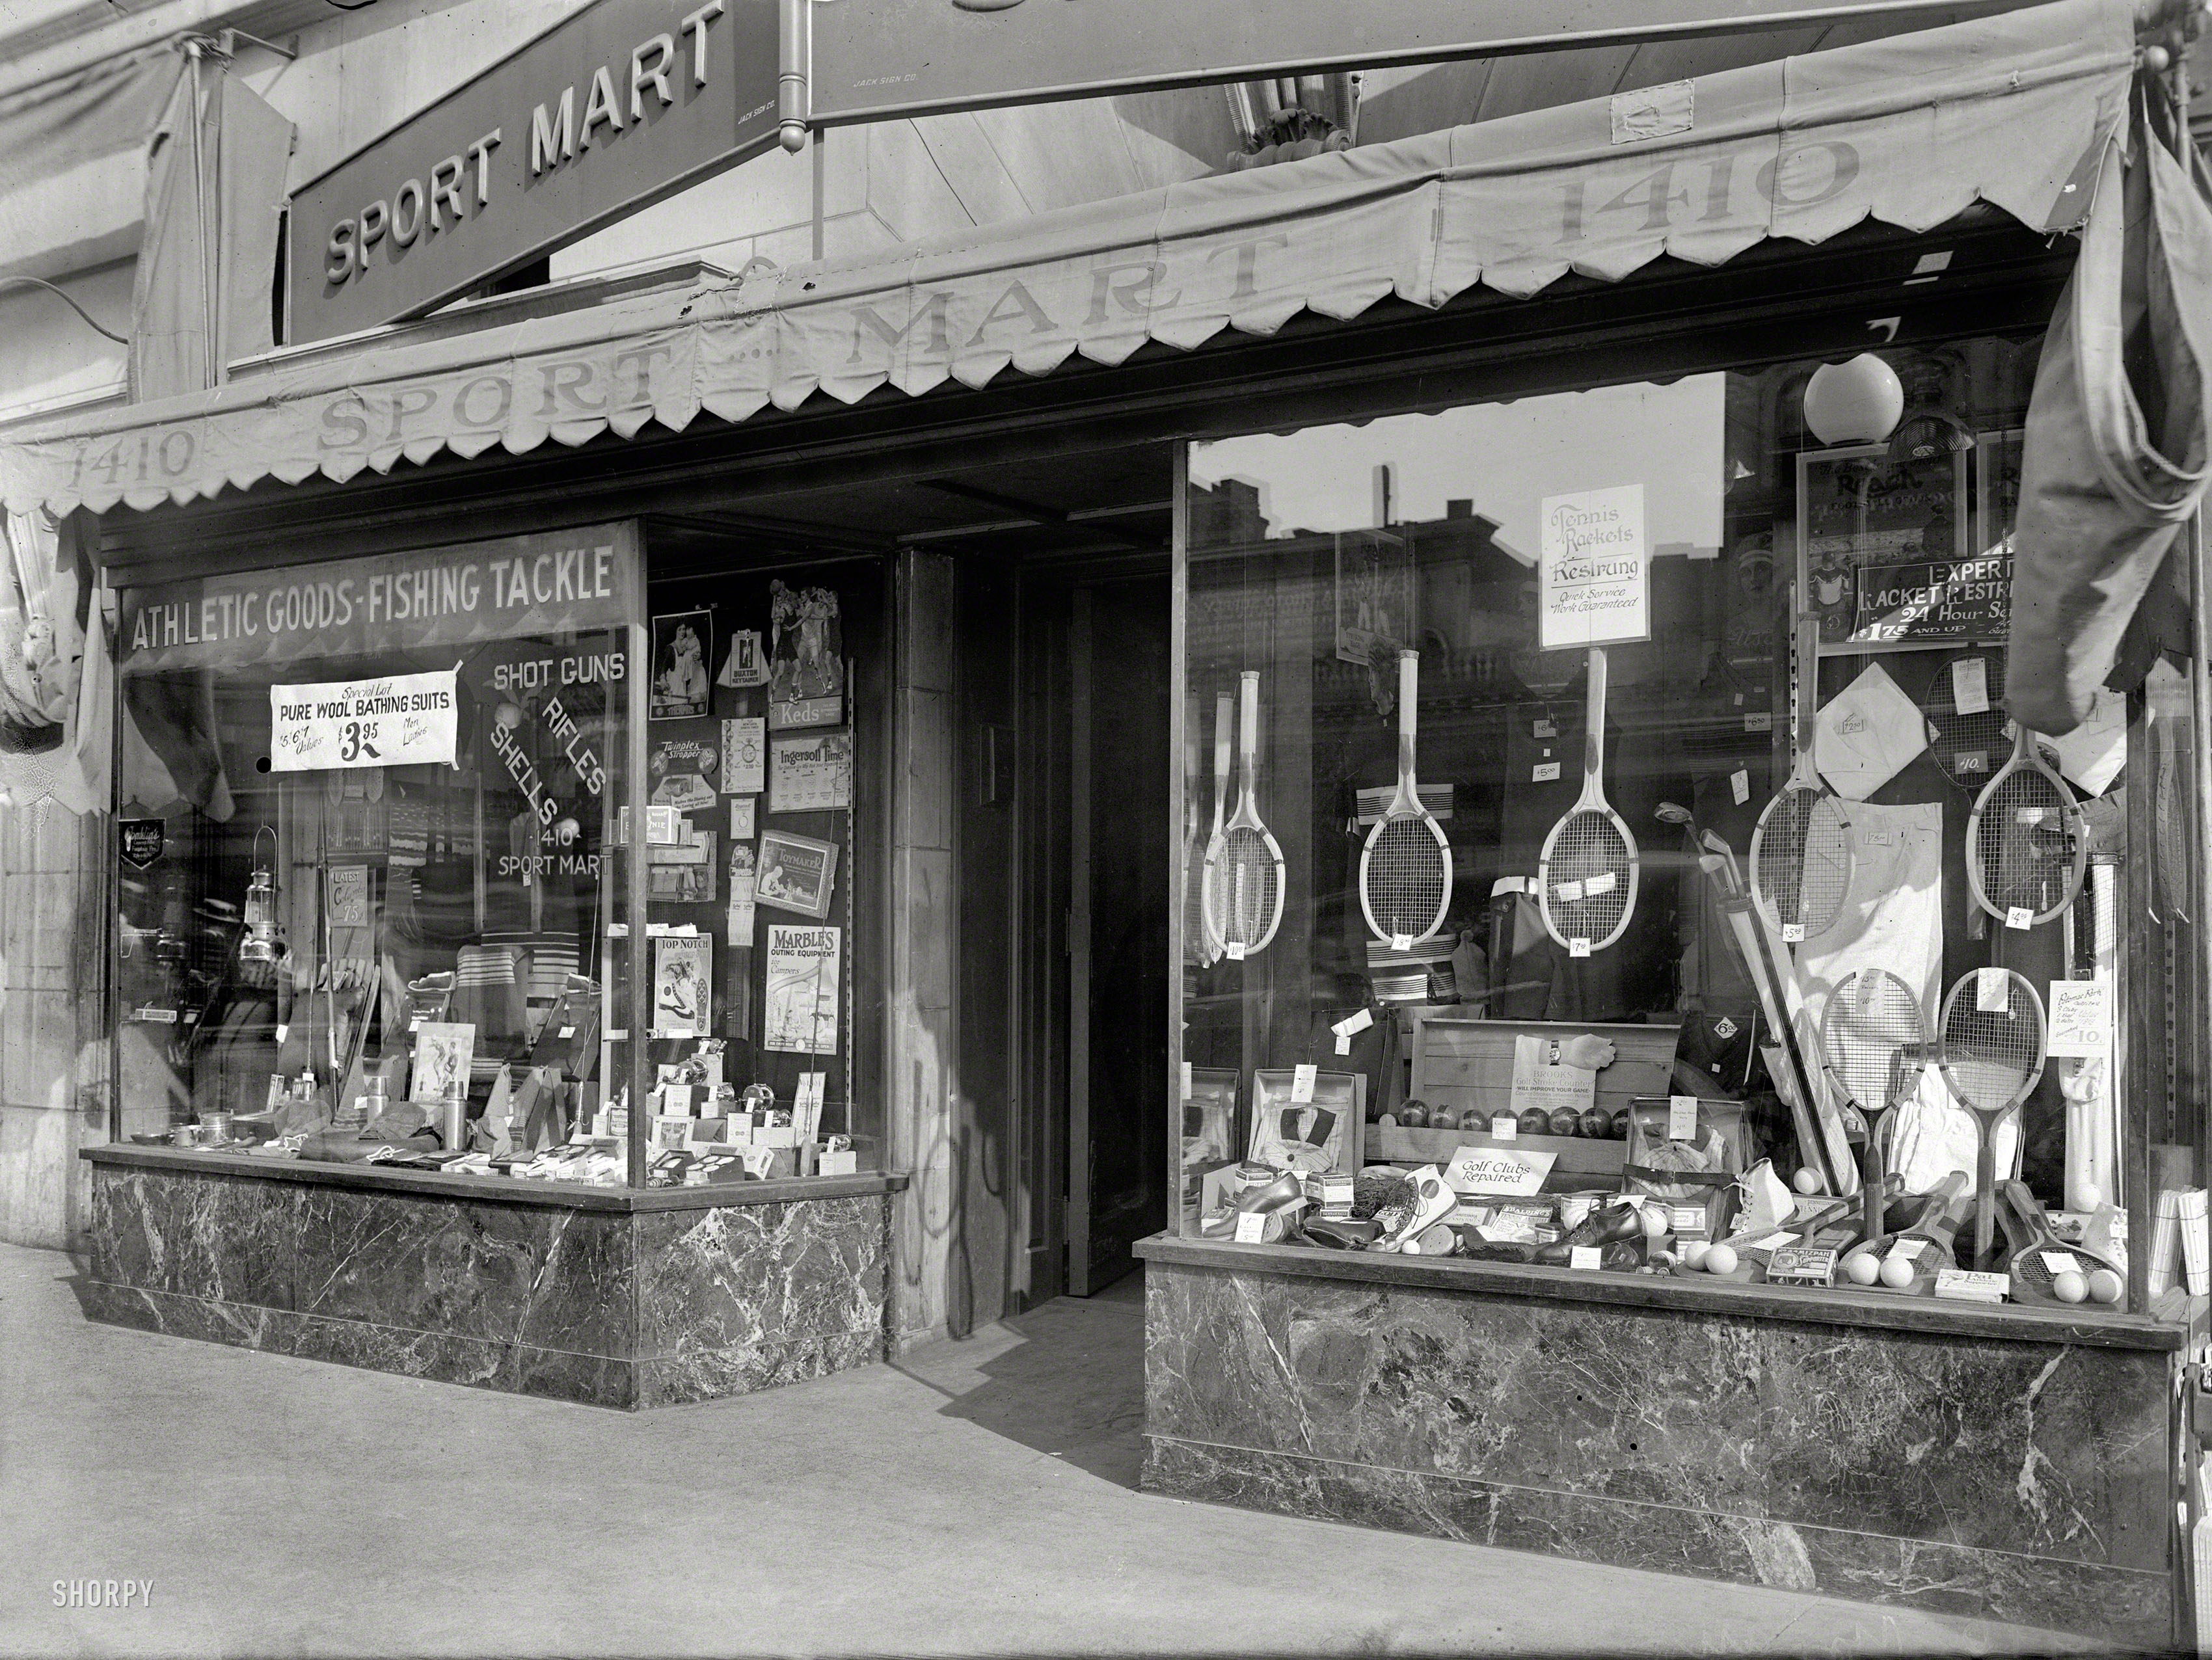 Washington, D.C., 1923. "Sport Mart, 1410 New York Avenue N.W." Continuing our day of window-shopping. National Photo glass negative. View full size.